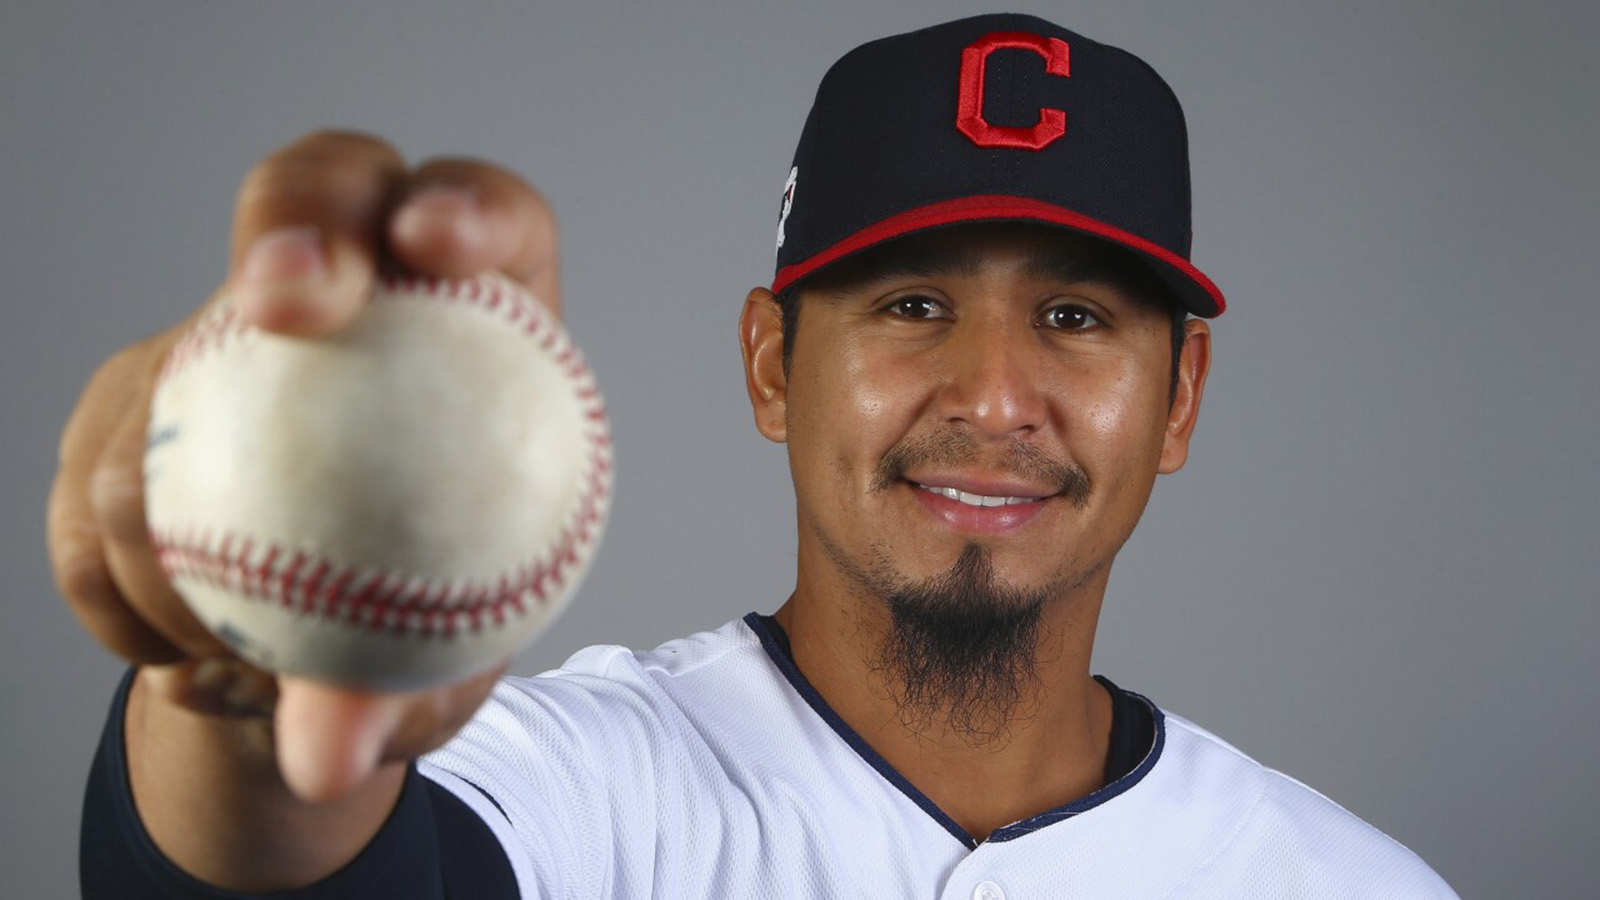 Carlos Carrasco: the True Superhero of Pizza and Pitchers